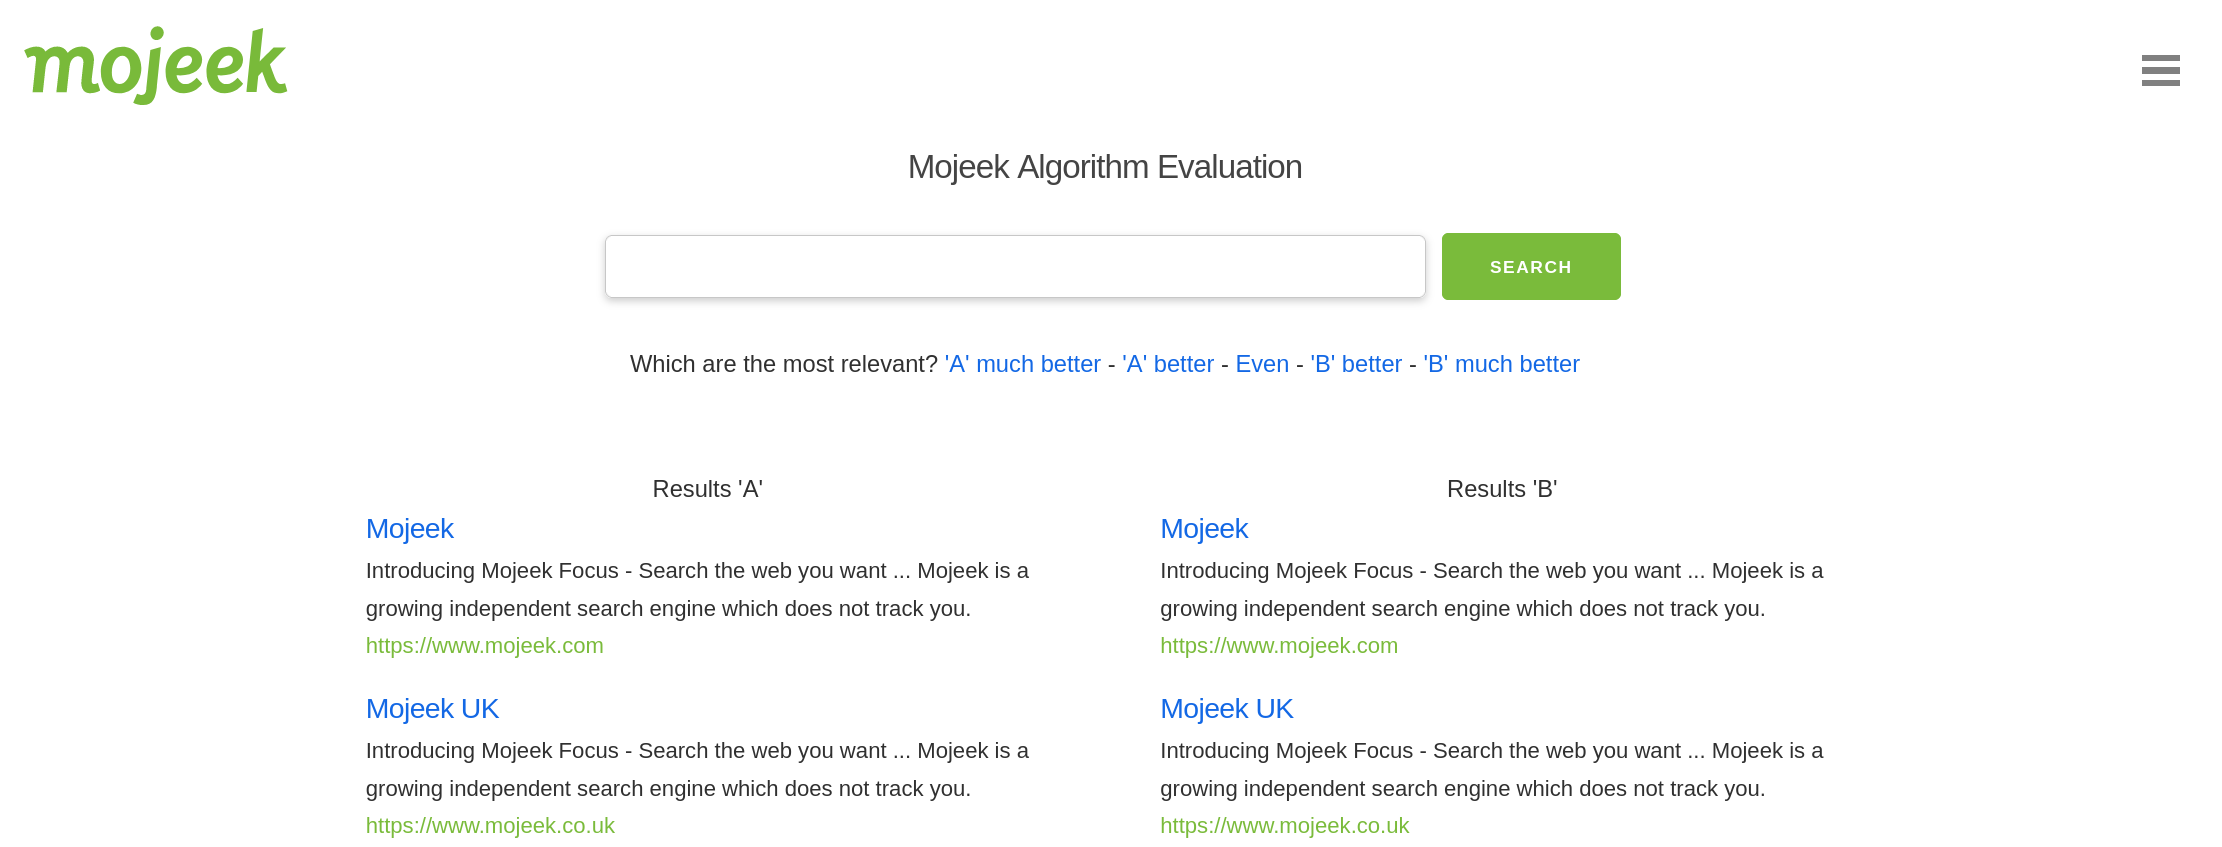 The Mojeek Evaluation tool home page, including a description of how to use the tool and an unfilled search box